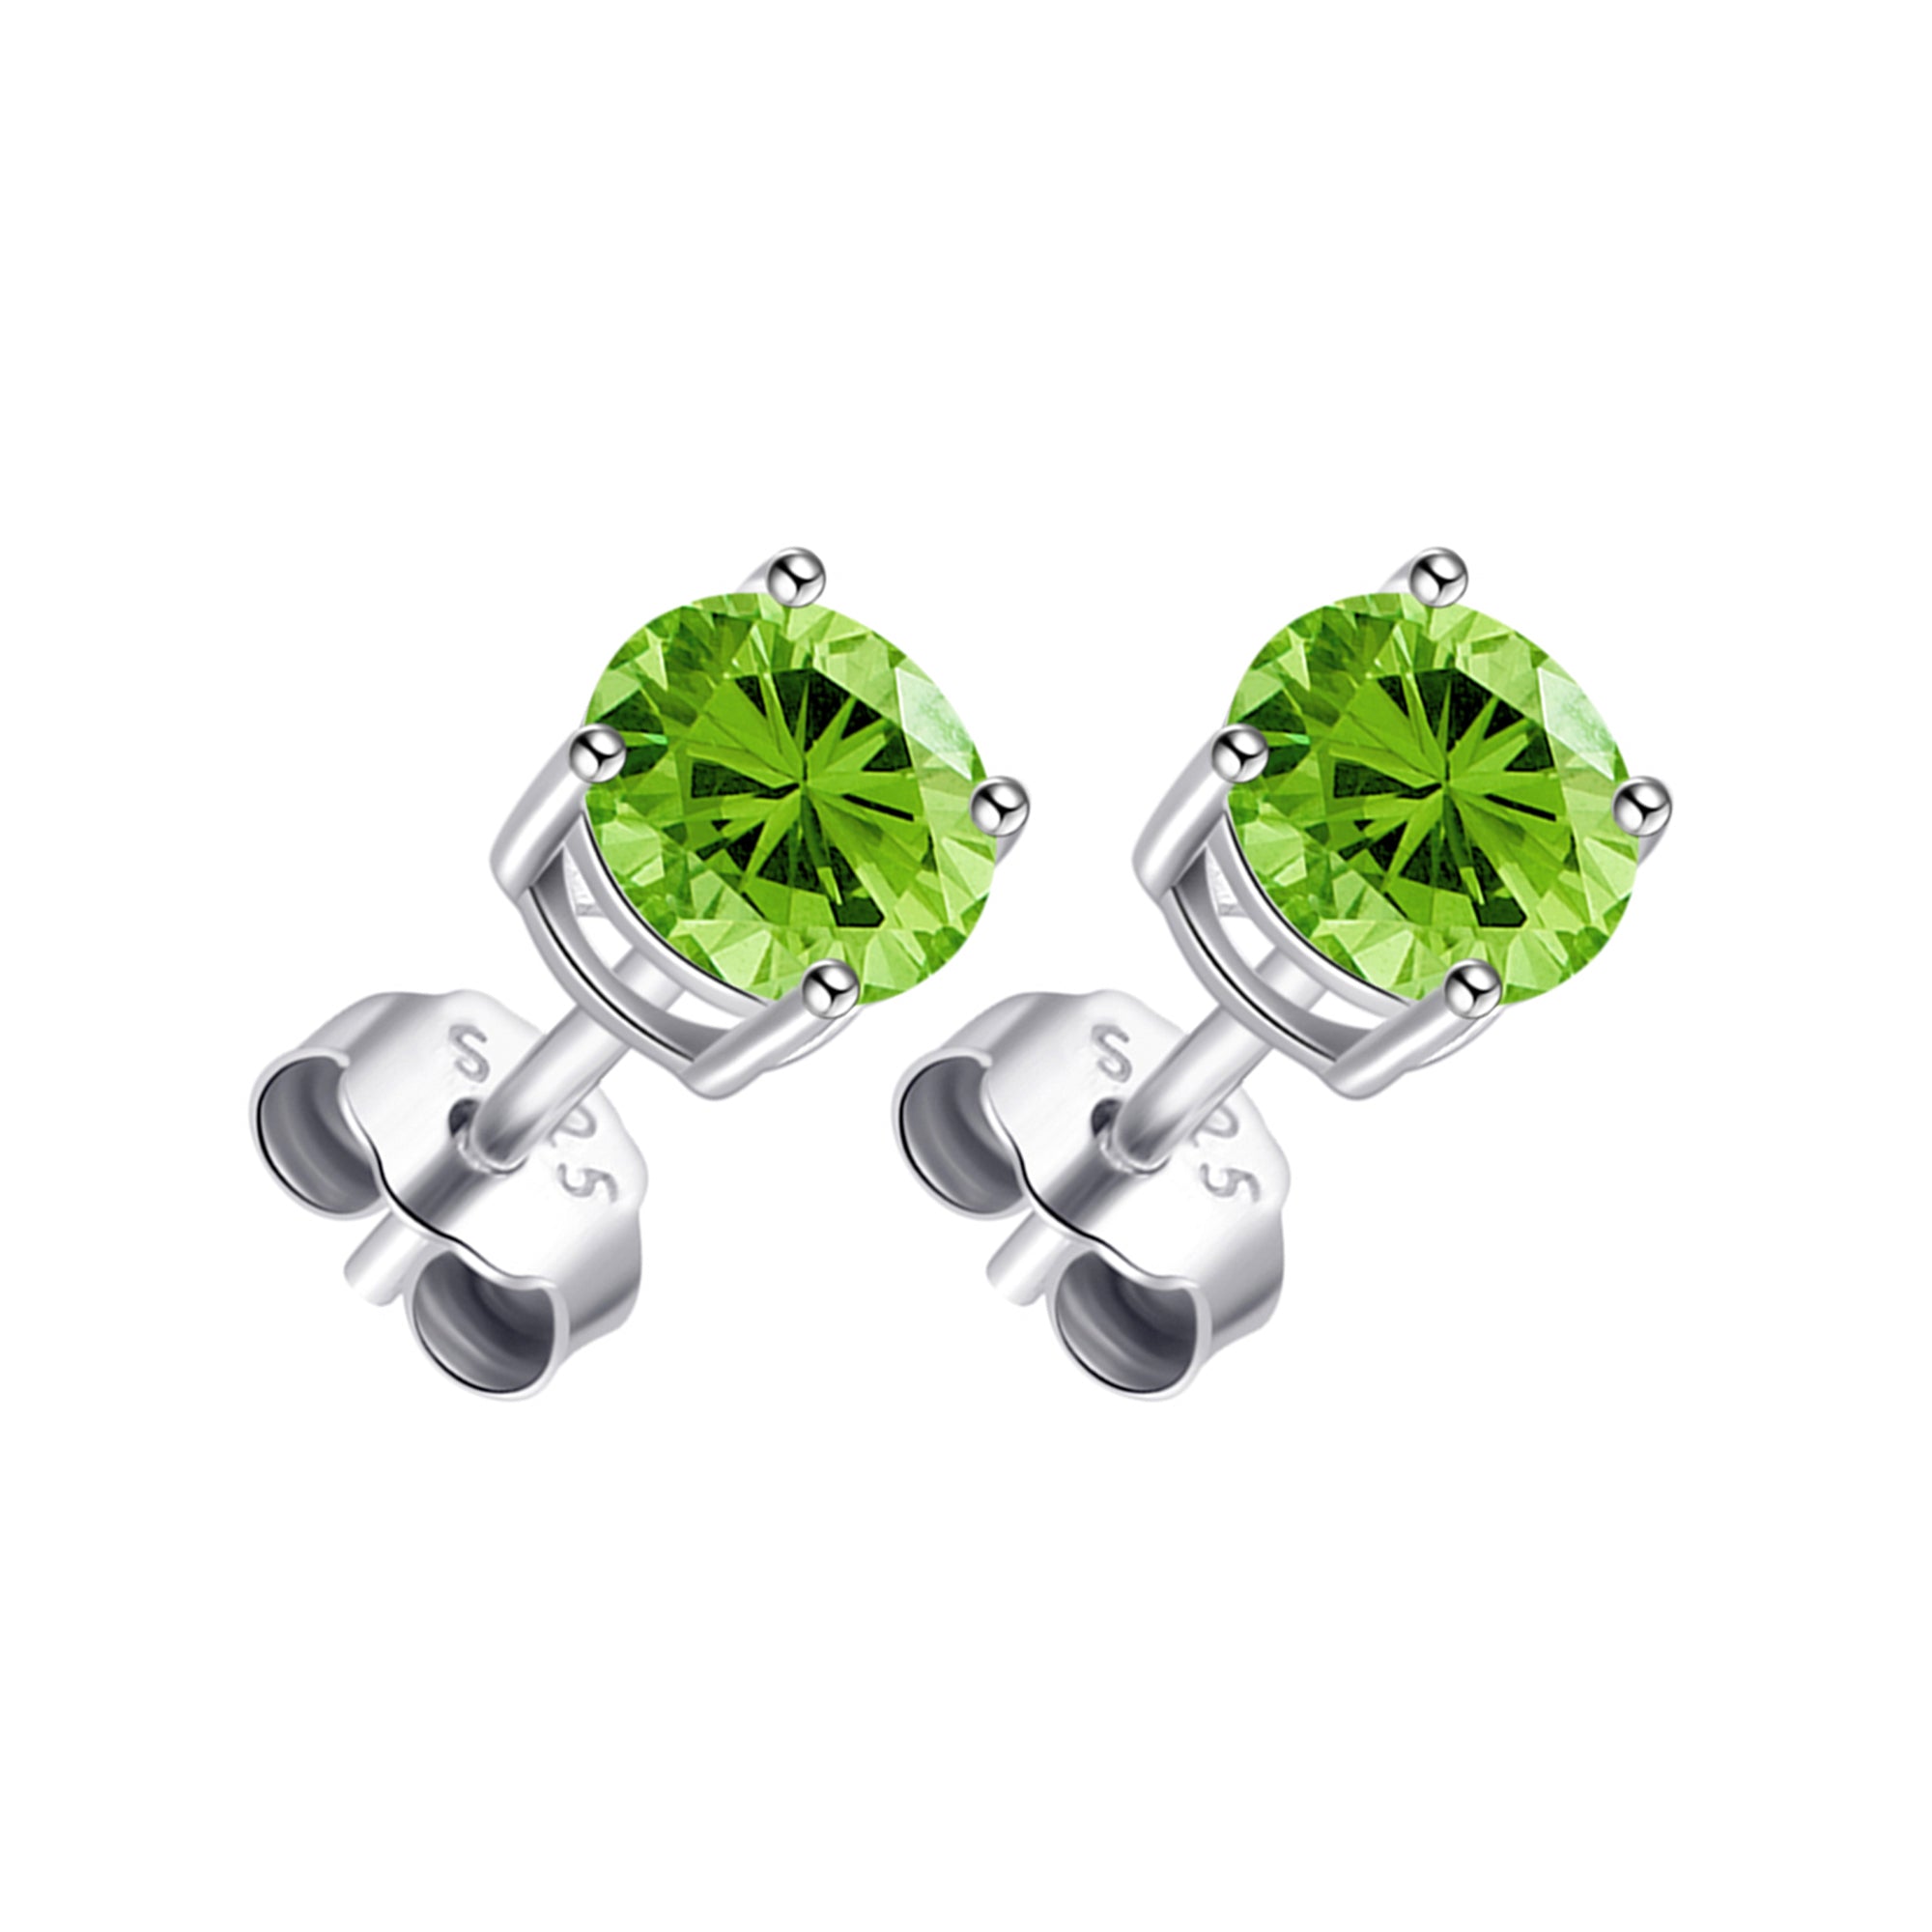 Sterling Silver Light Green Earrings Created with Zircondia® Crystals by Philip Jones Jewellery